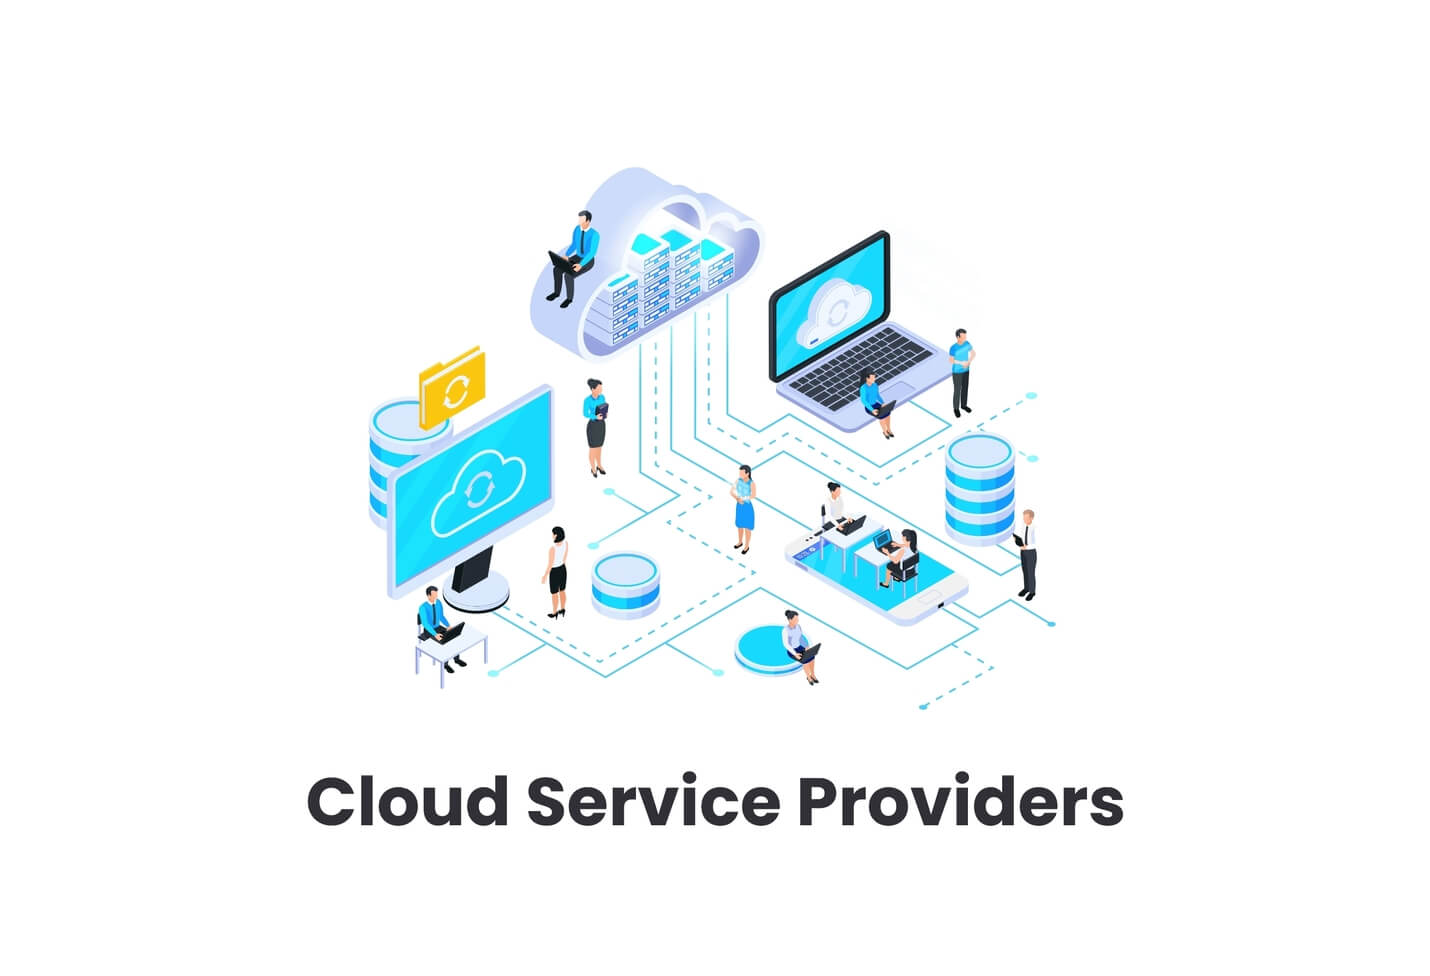  Cloud service providers ensure compliance with regulations and standards for data protection, security, and privacy.